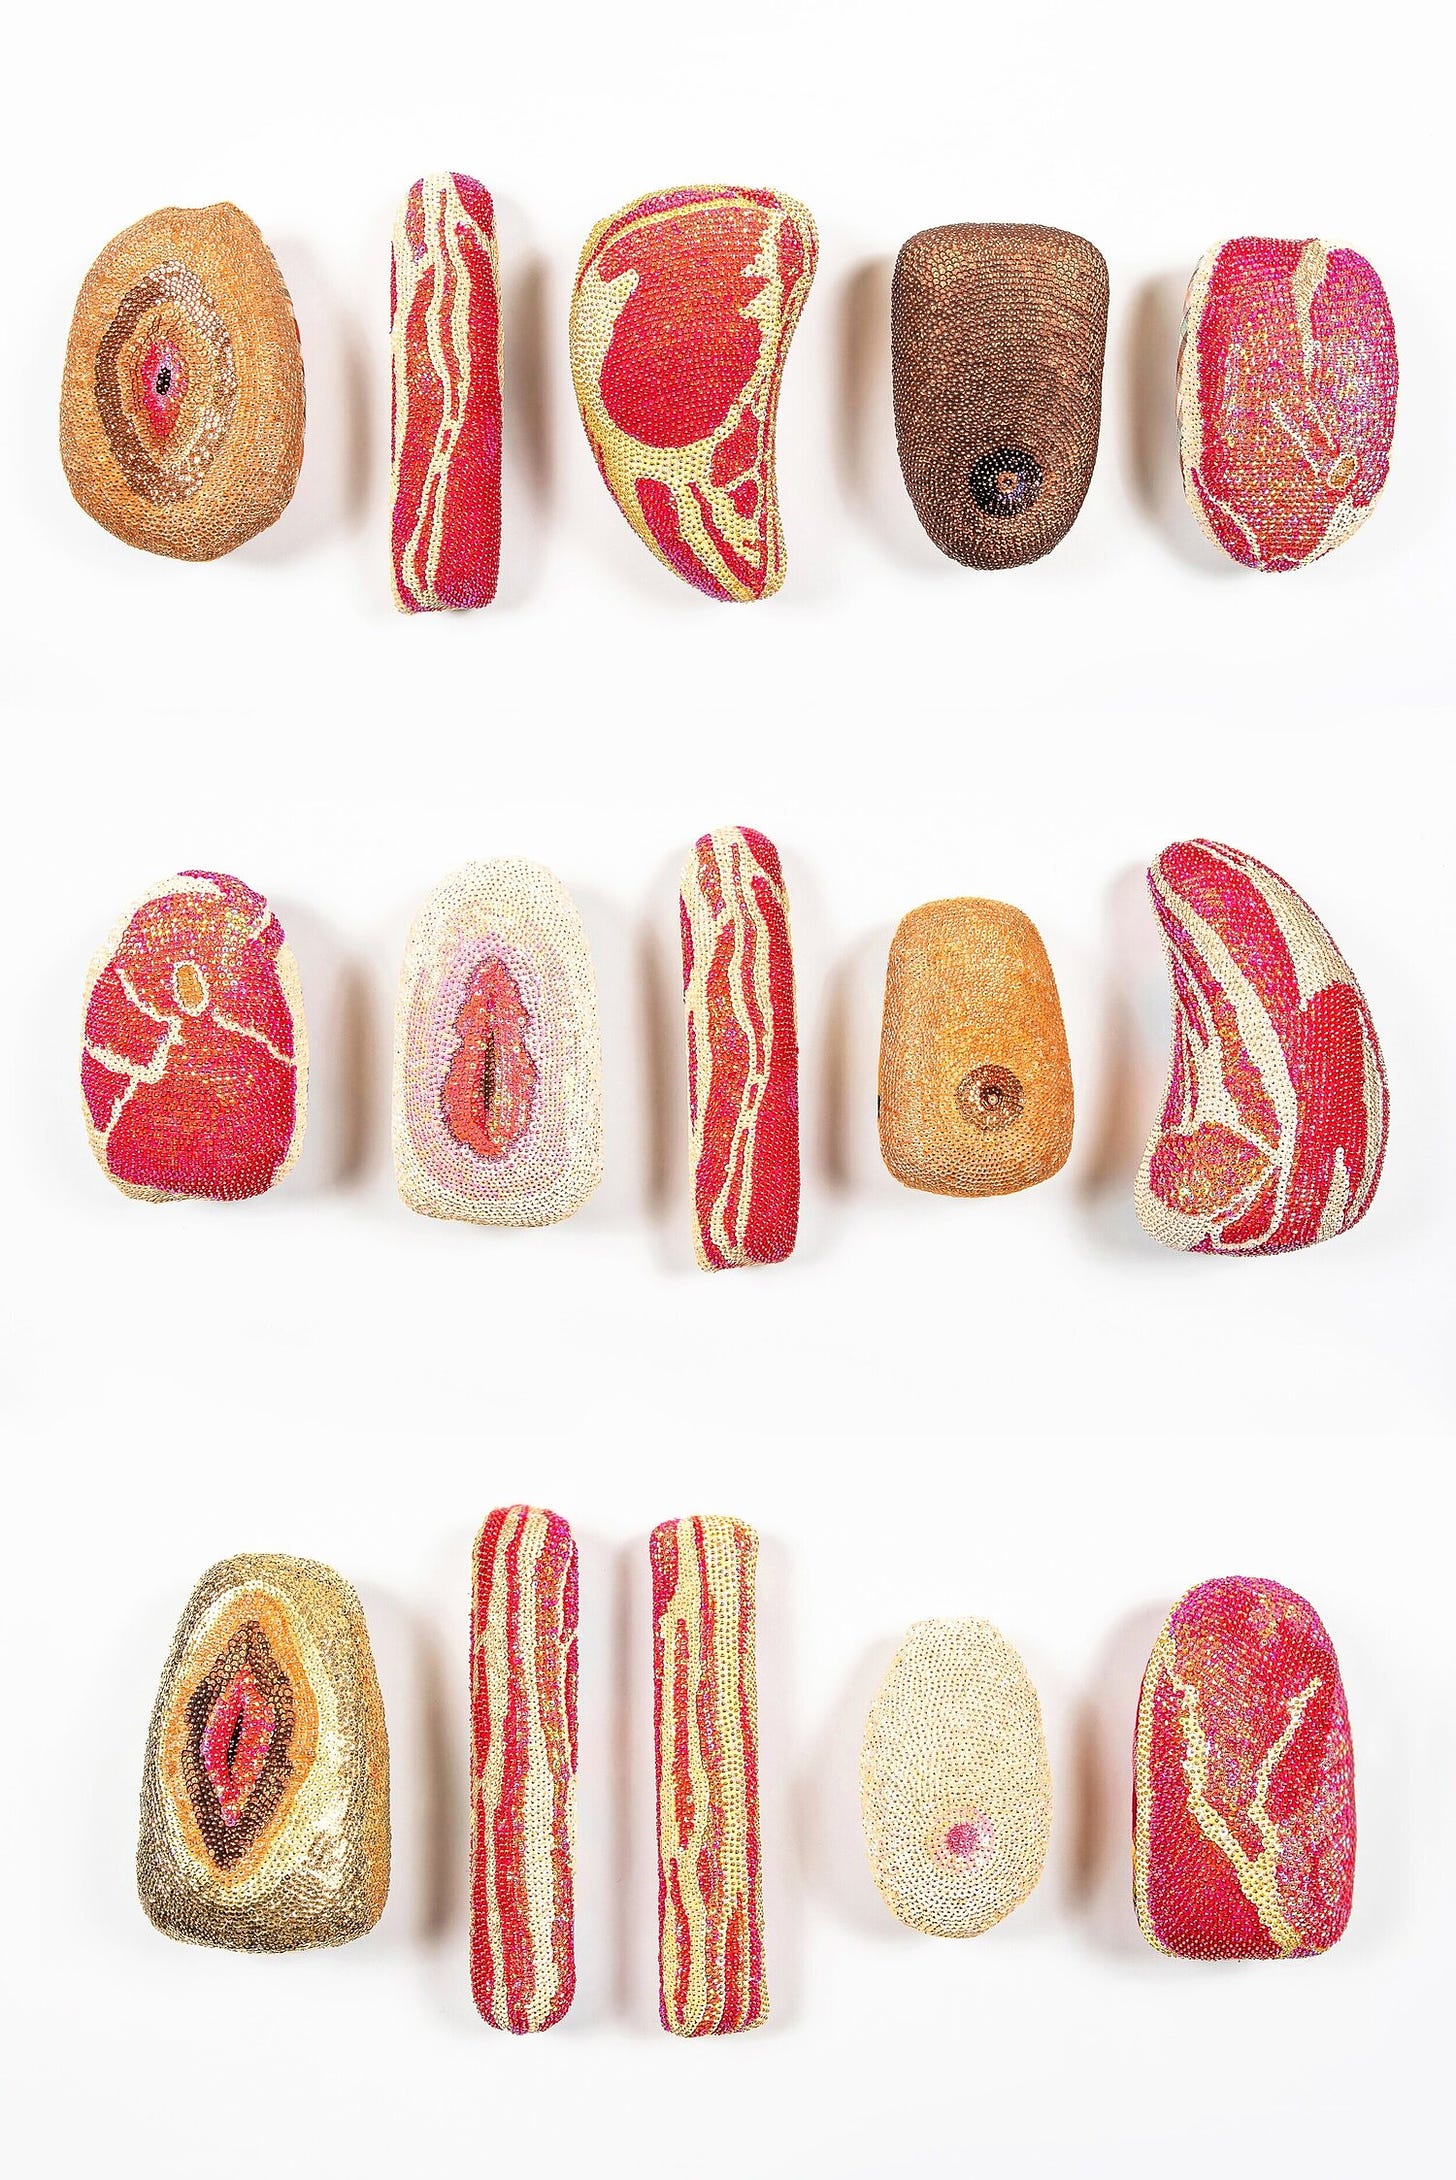 fifteen sequined shapes floating against a white background. The long, skinny ones are sequined to look like slabs of bacon. The shapes that are wider at the top and narrower at the bottom are sequined to look like cuts of steak. The oval forms are sequined to look like either breasts or vulva, with varying skin tones.